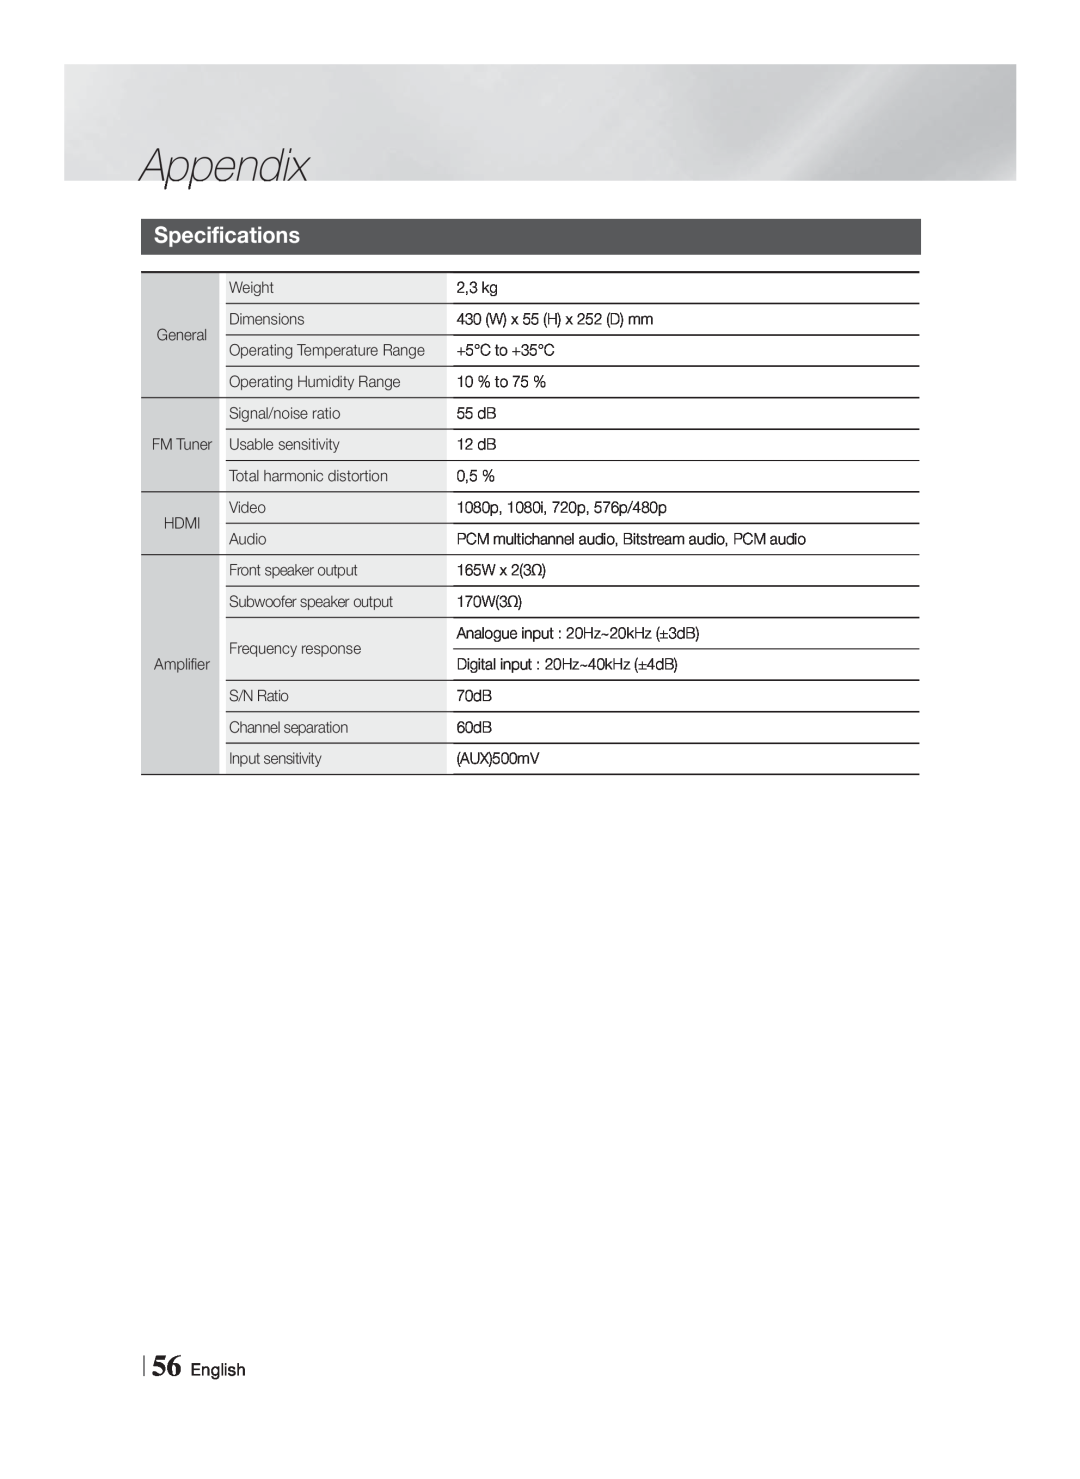 Samsung HT-FS5200/XN, HT-F5200/XN, HT-F5200/EN, HT-FS5200/EN, HT-F5200/ZF, HT-FS5200/ZF manual Specifications, English, Appendix 